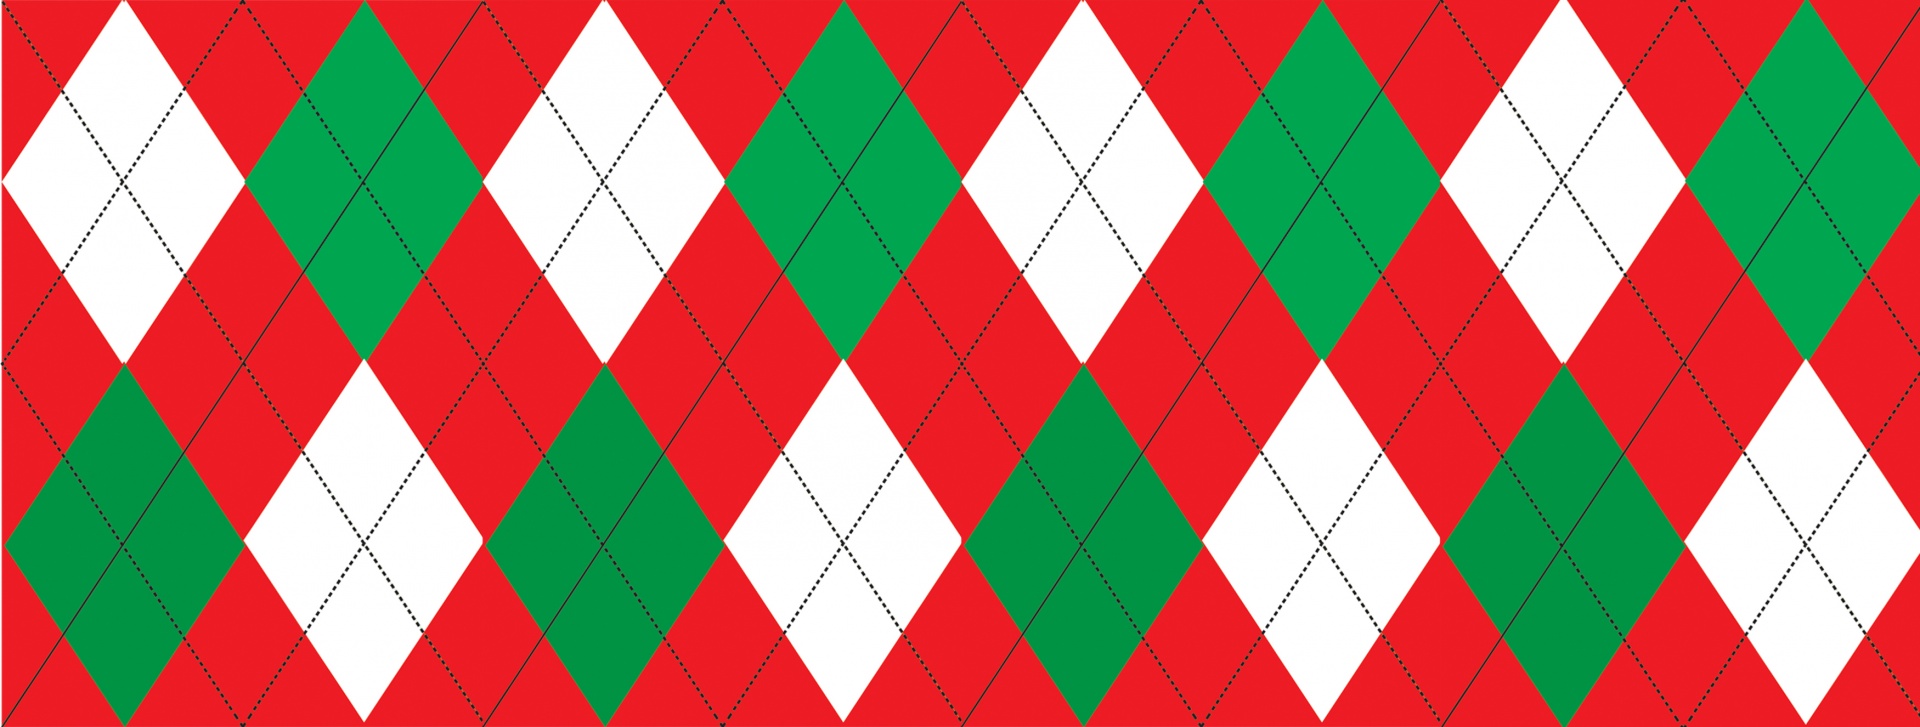 Red And Green Argyle Seamless